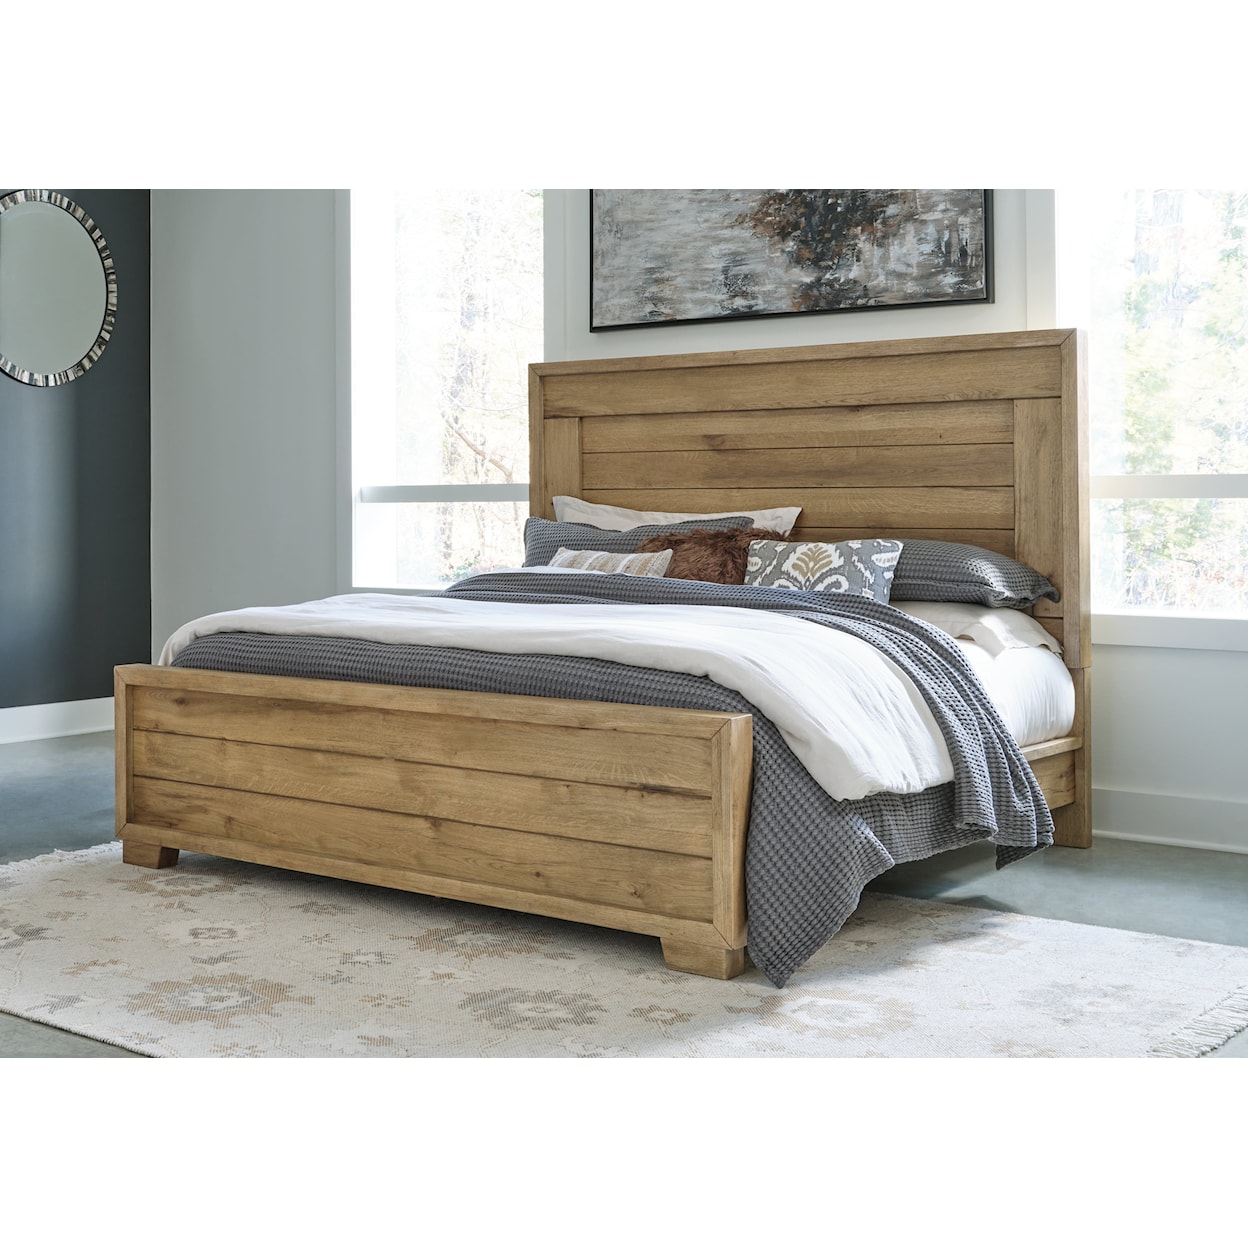 Signature Design by Ashley Furniture Galliden King Panel Bed